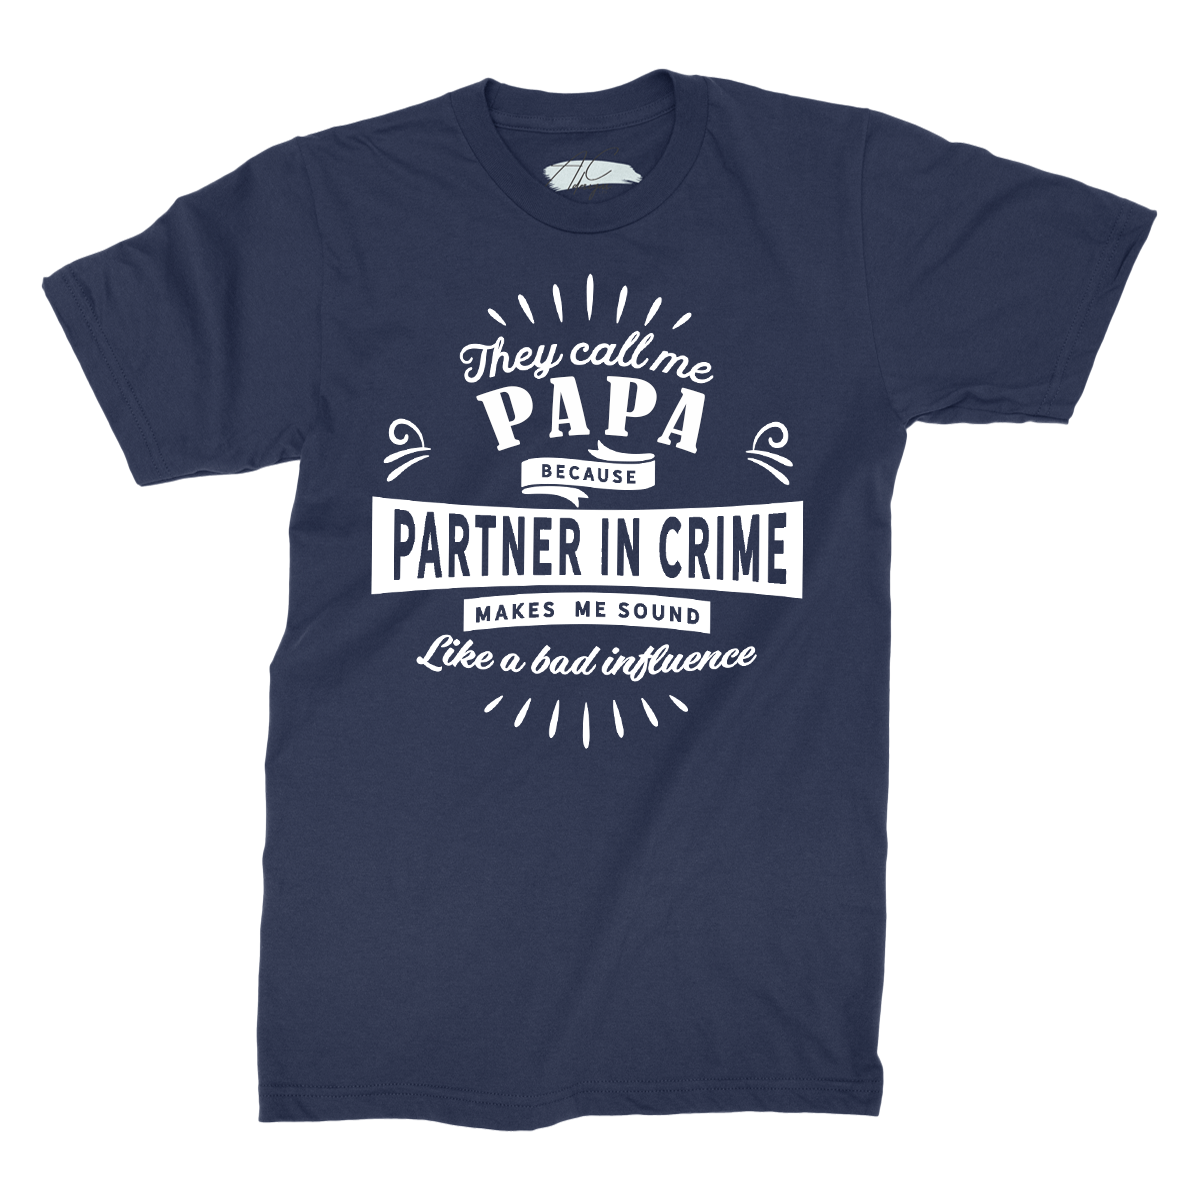 They call me PERSONALISED because Partner in Crime makes me sound like a bad influence - Navy T-Shirt